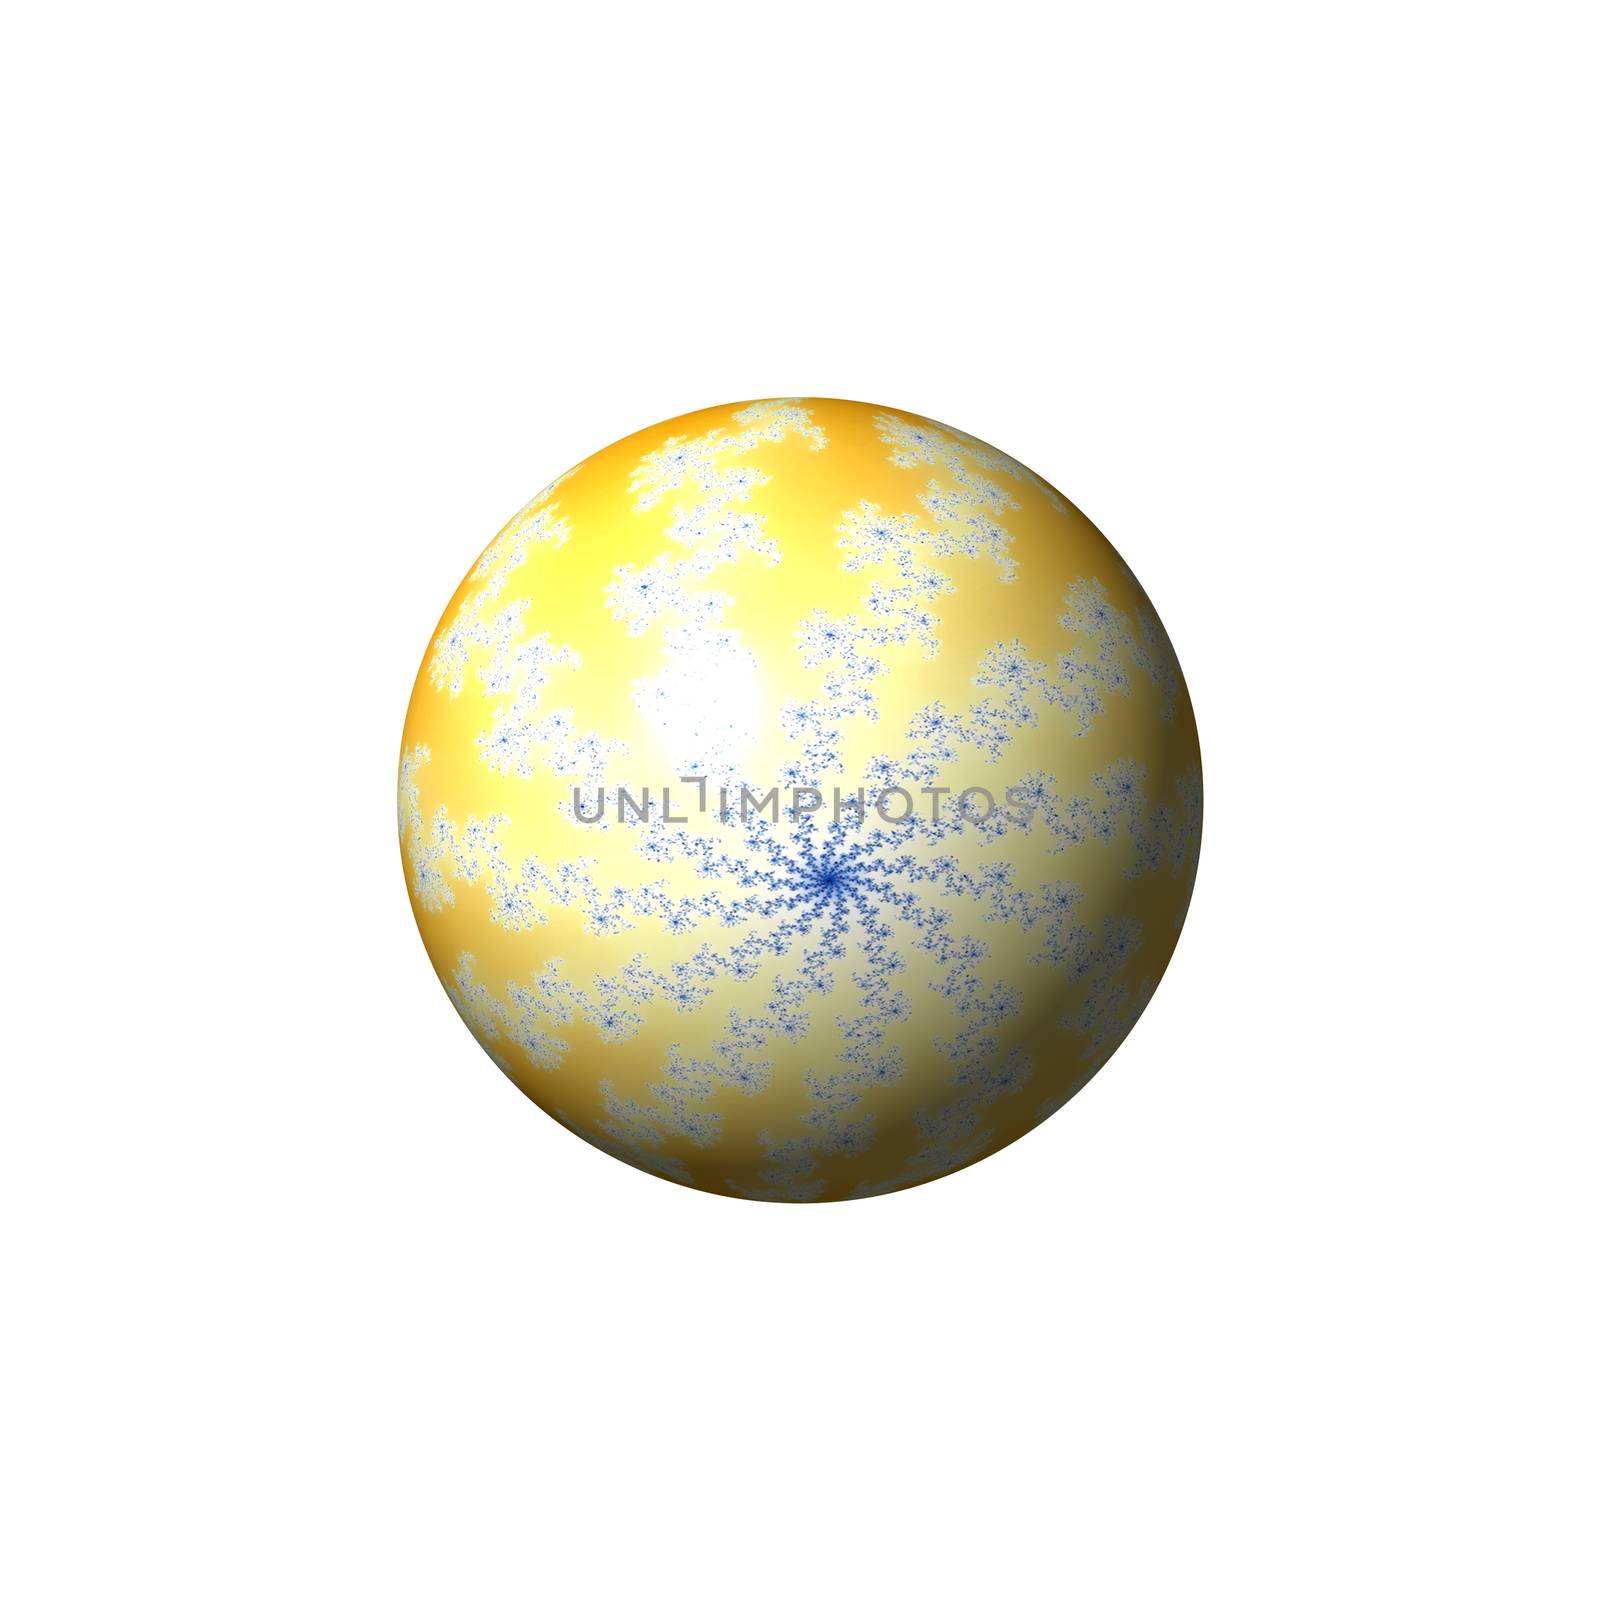 A yellow abstract fractal globe on white background.